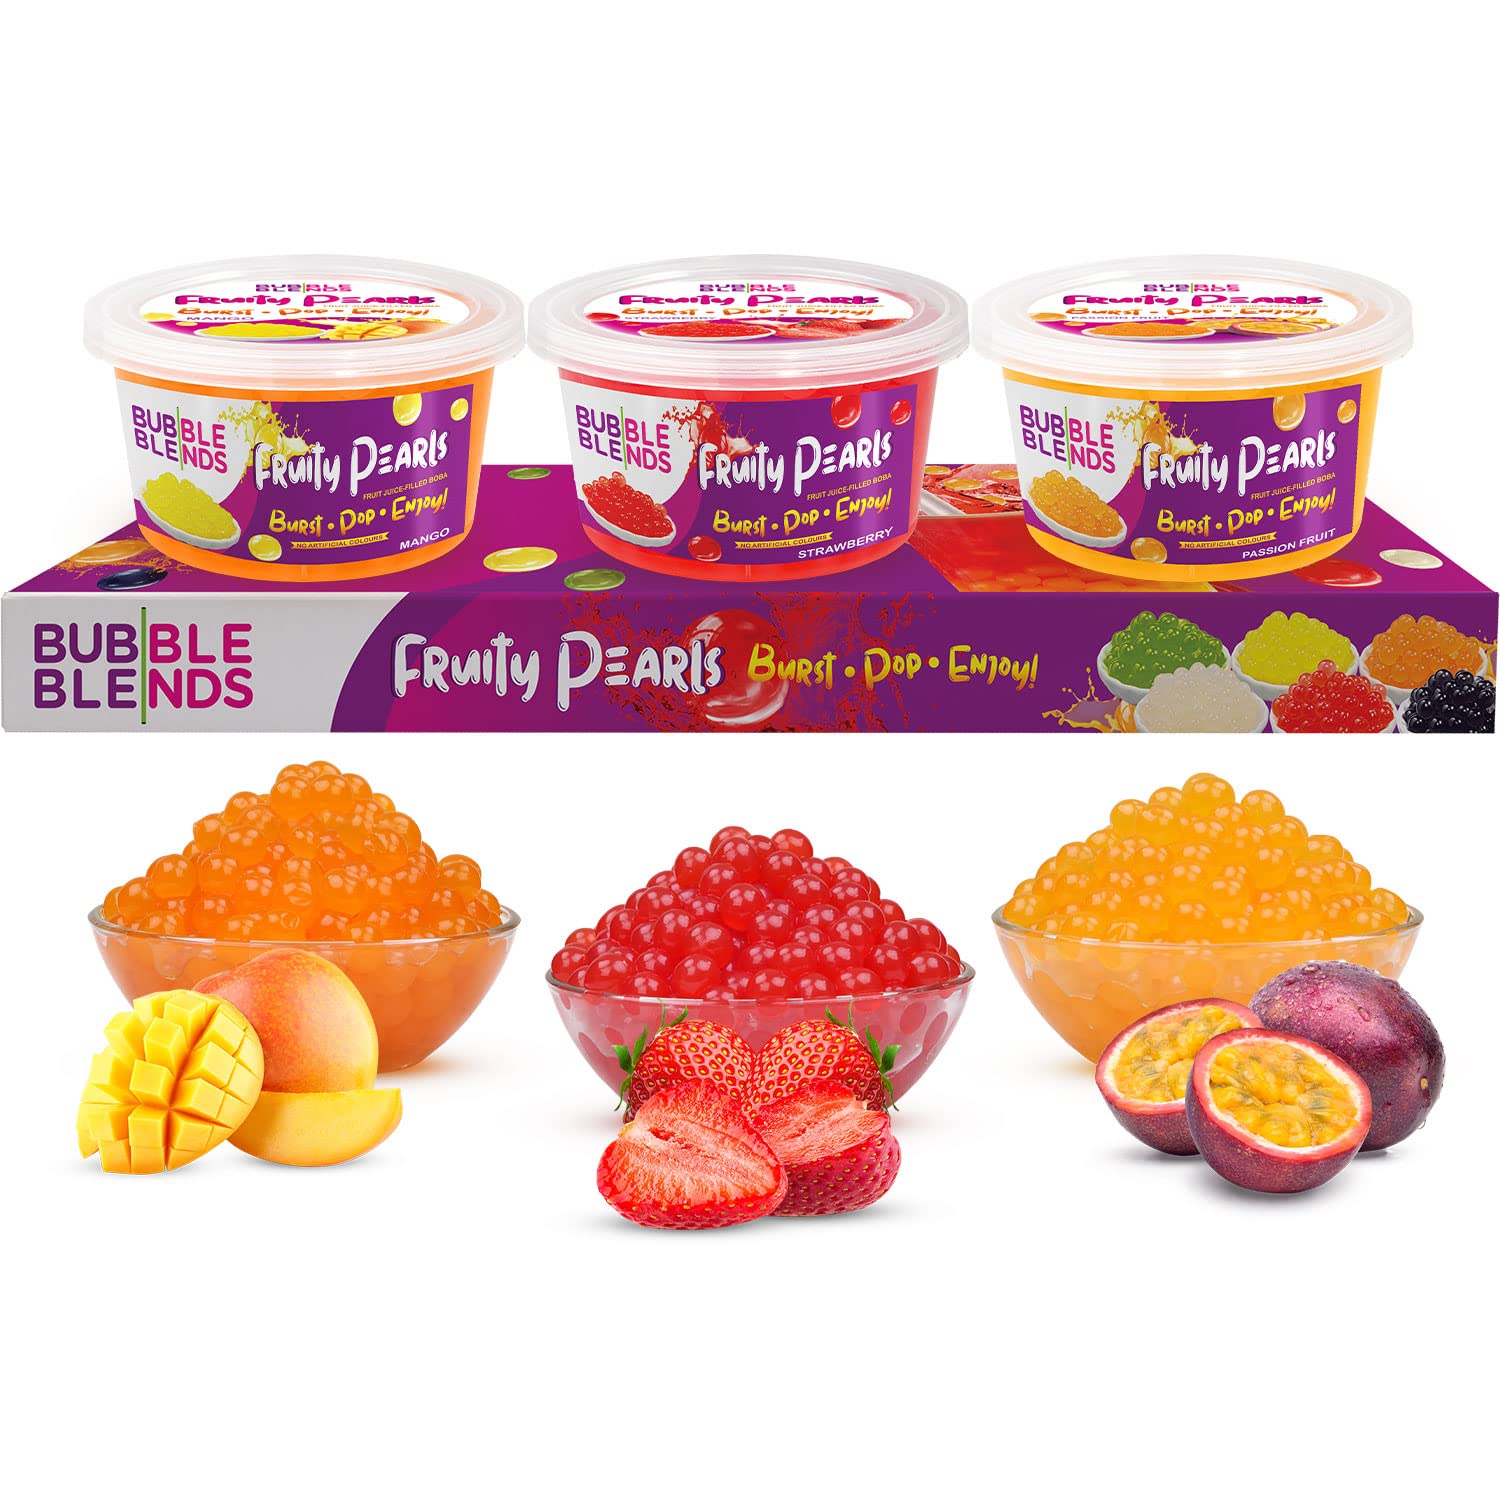 Bubble Blends Mango, Passion Fruit, Strawberry Popping Boba Variety Pack - Boba Pearls with Real Fruit Juice - Add-ons for Bubble Tea - Fat-Free Popping Pearls